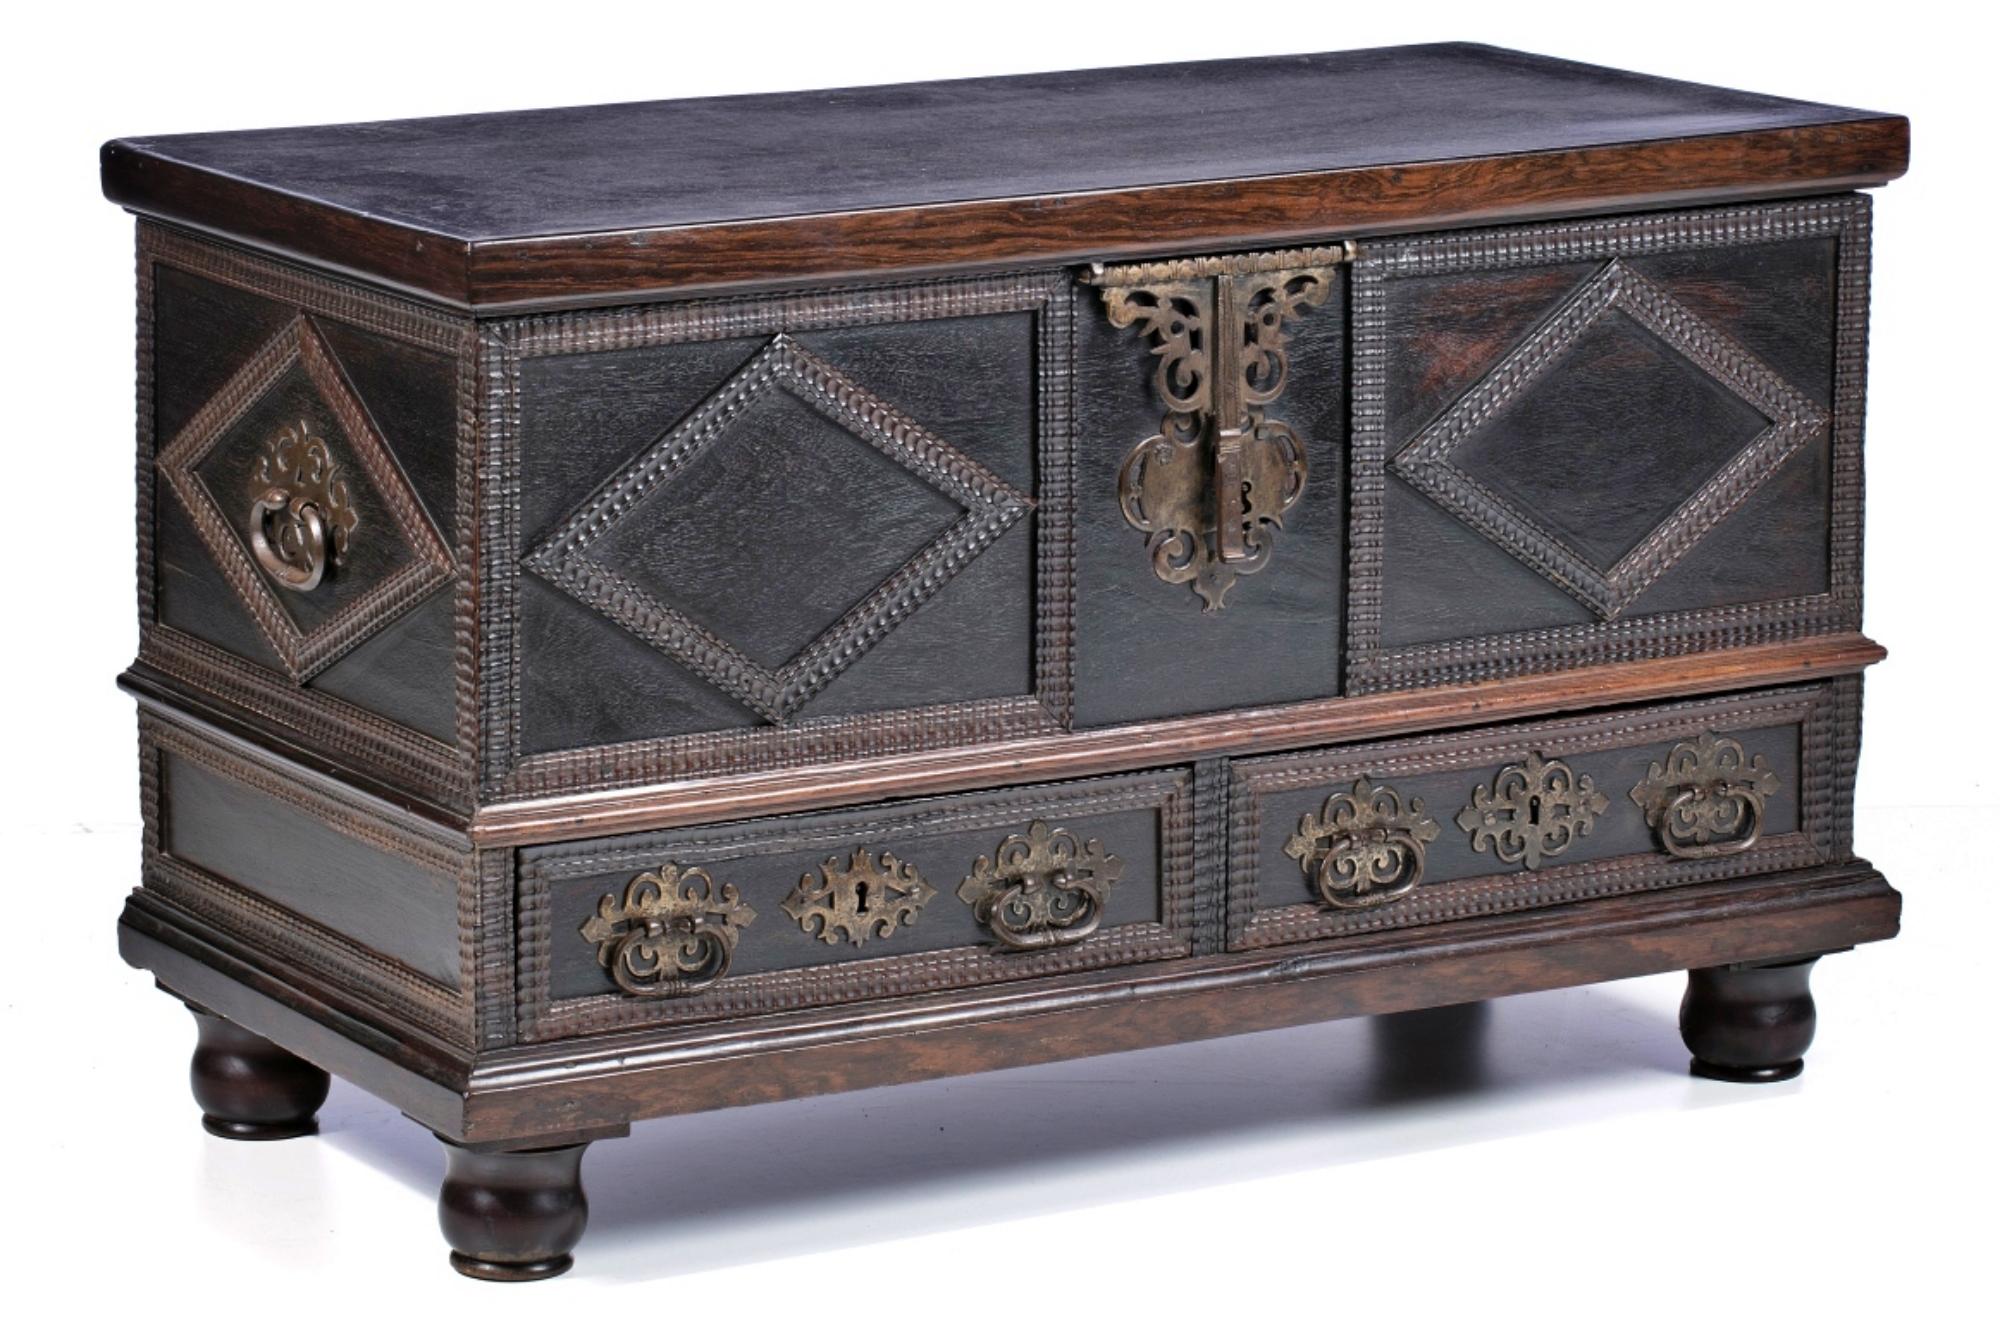 Portuguese Ark
17th century 
in vineyard wood, with 2 drawers. 
Palisander frames and friezes. 
Brass fittings and handles. 
Signs of use. 
Dim .: 69 x 112 x 55 cm.